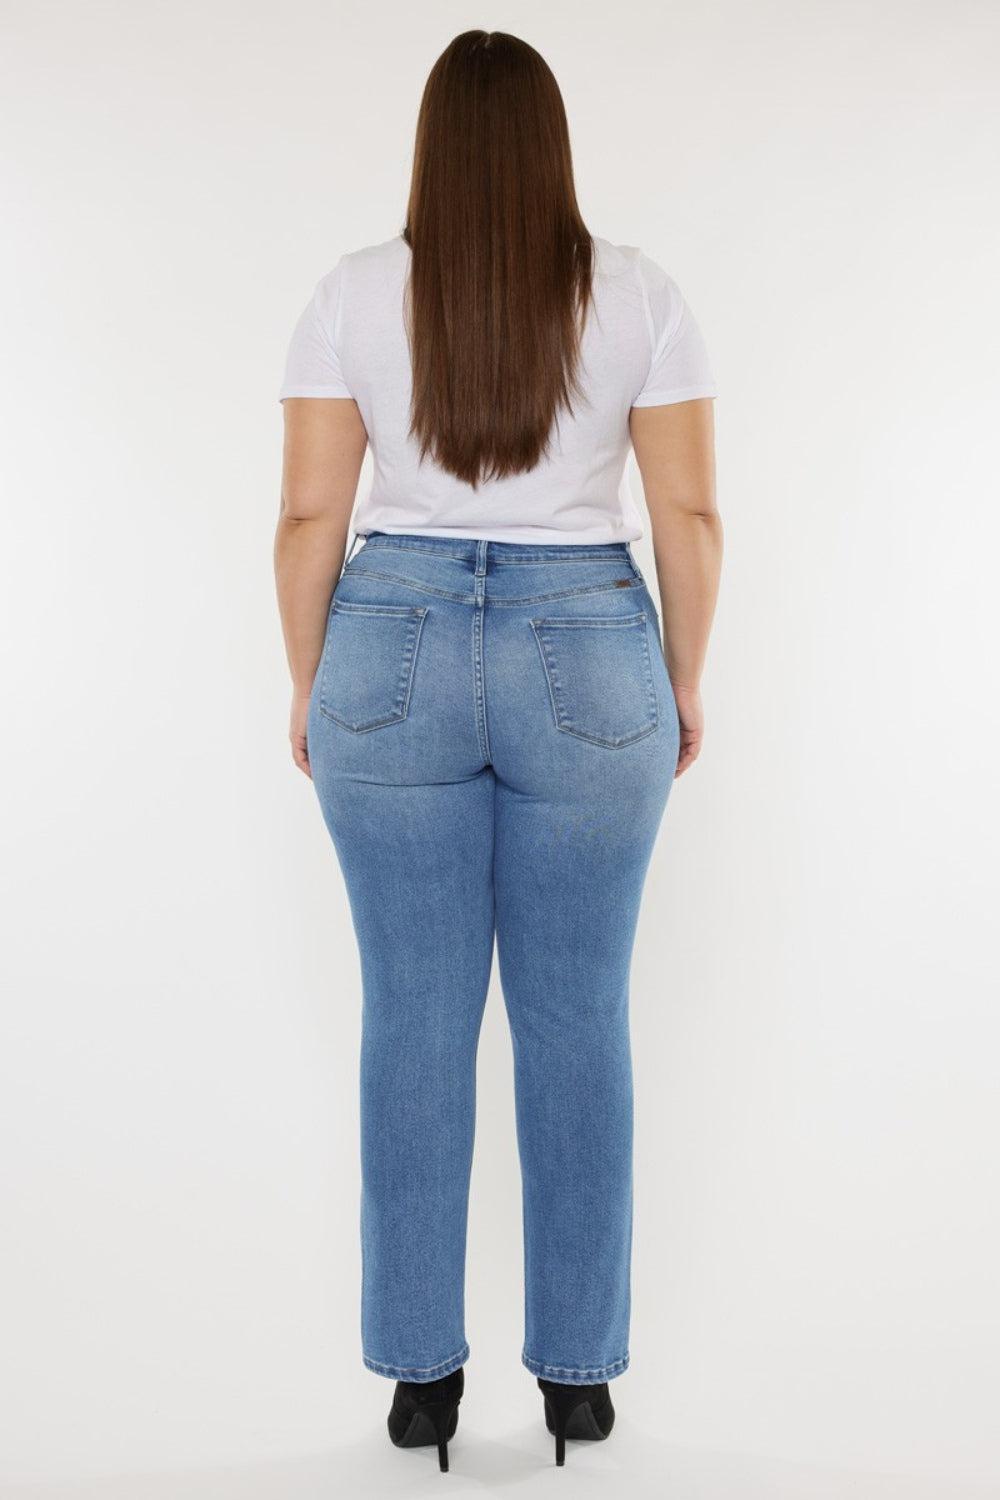 the back of a woman in a white shirt and jeans